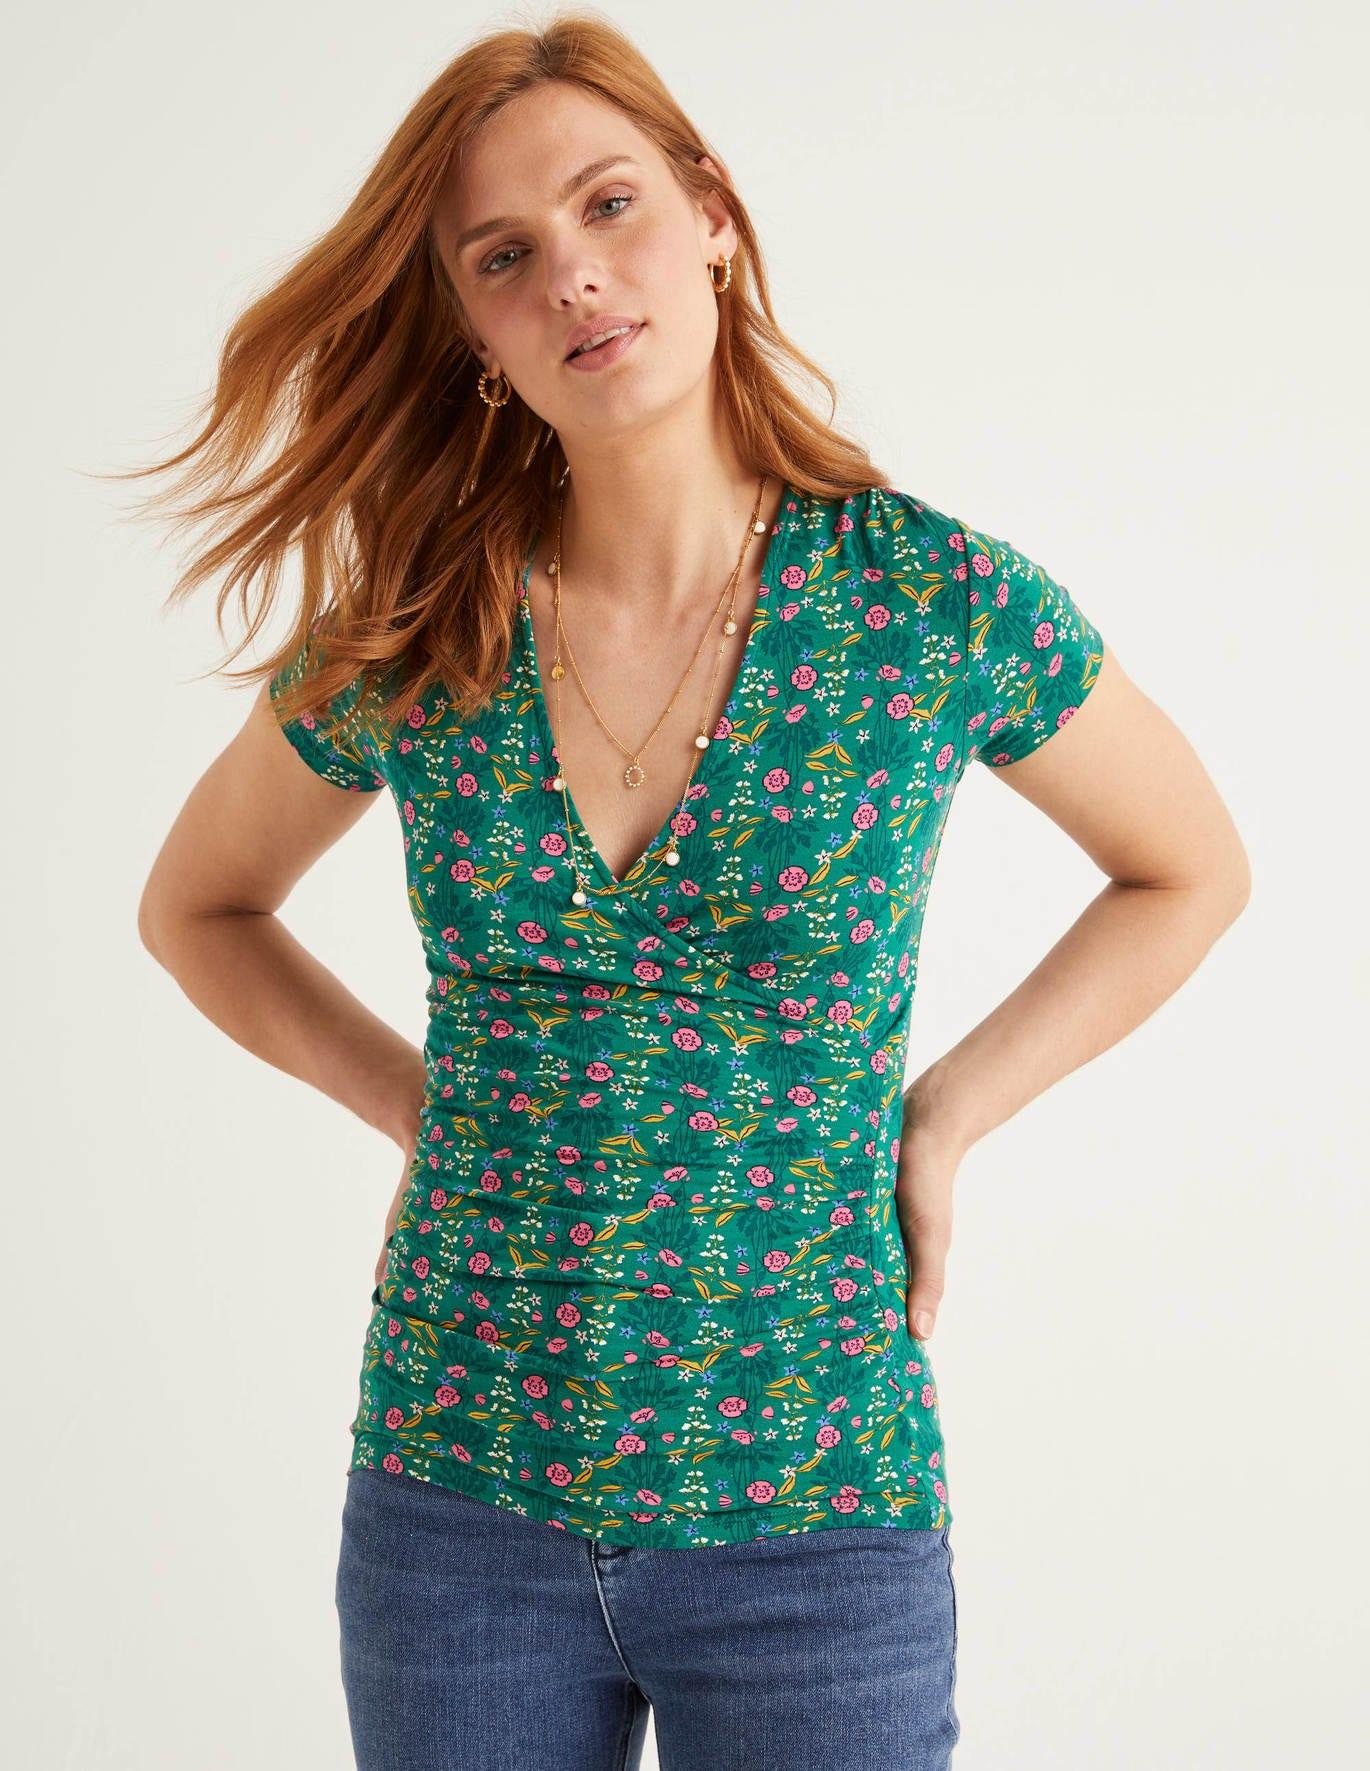 Boden Synthetic Short Sleeve Jersey Wrap Top Forest, Garden Charm in ...